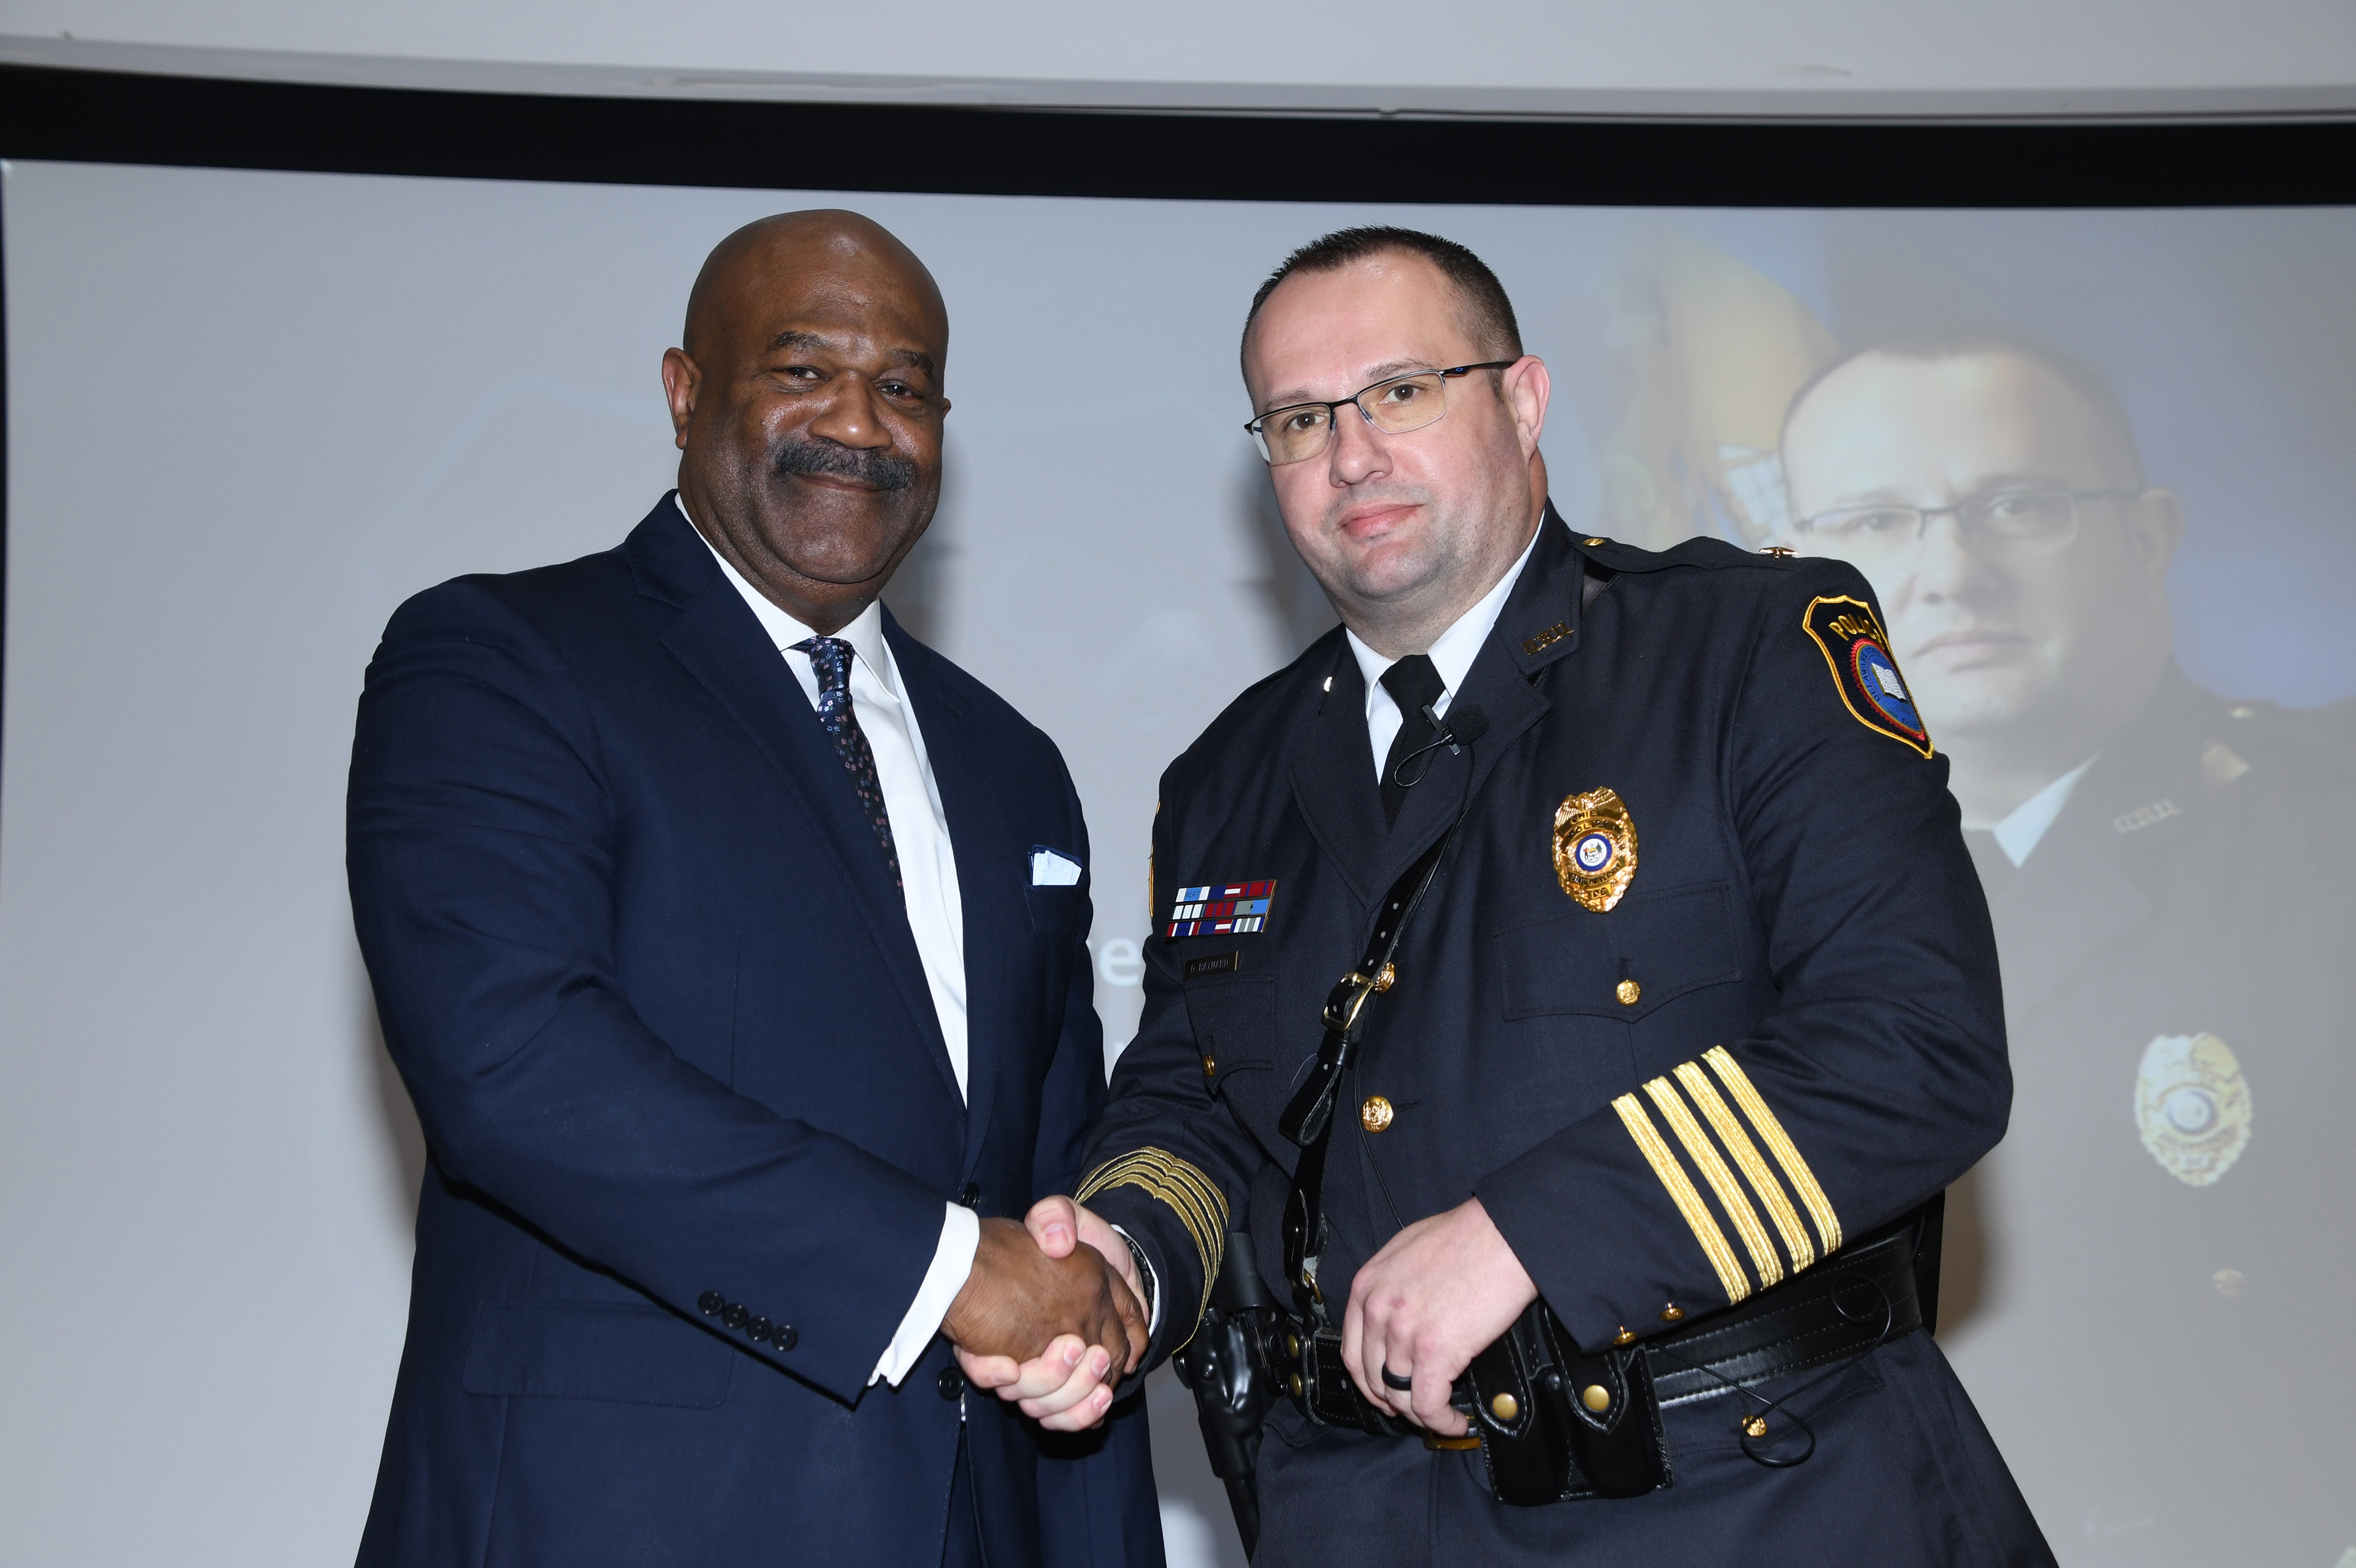 Newly sworn in Superintendent/Vice President James Overton and Chief of Police/Assistant Vice President Donald Baynard shake hands after taking the oath of their promotions during the DSU Police Department Change of Command, Promotions and Awards Ceremony.